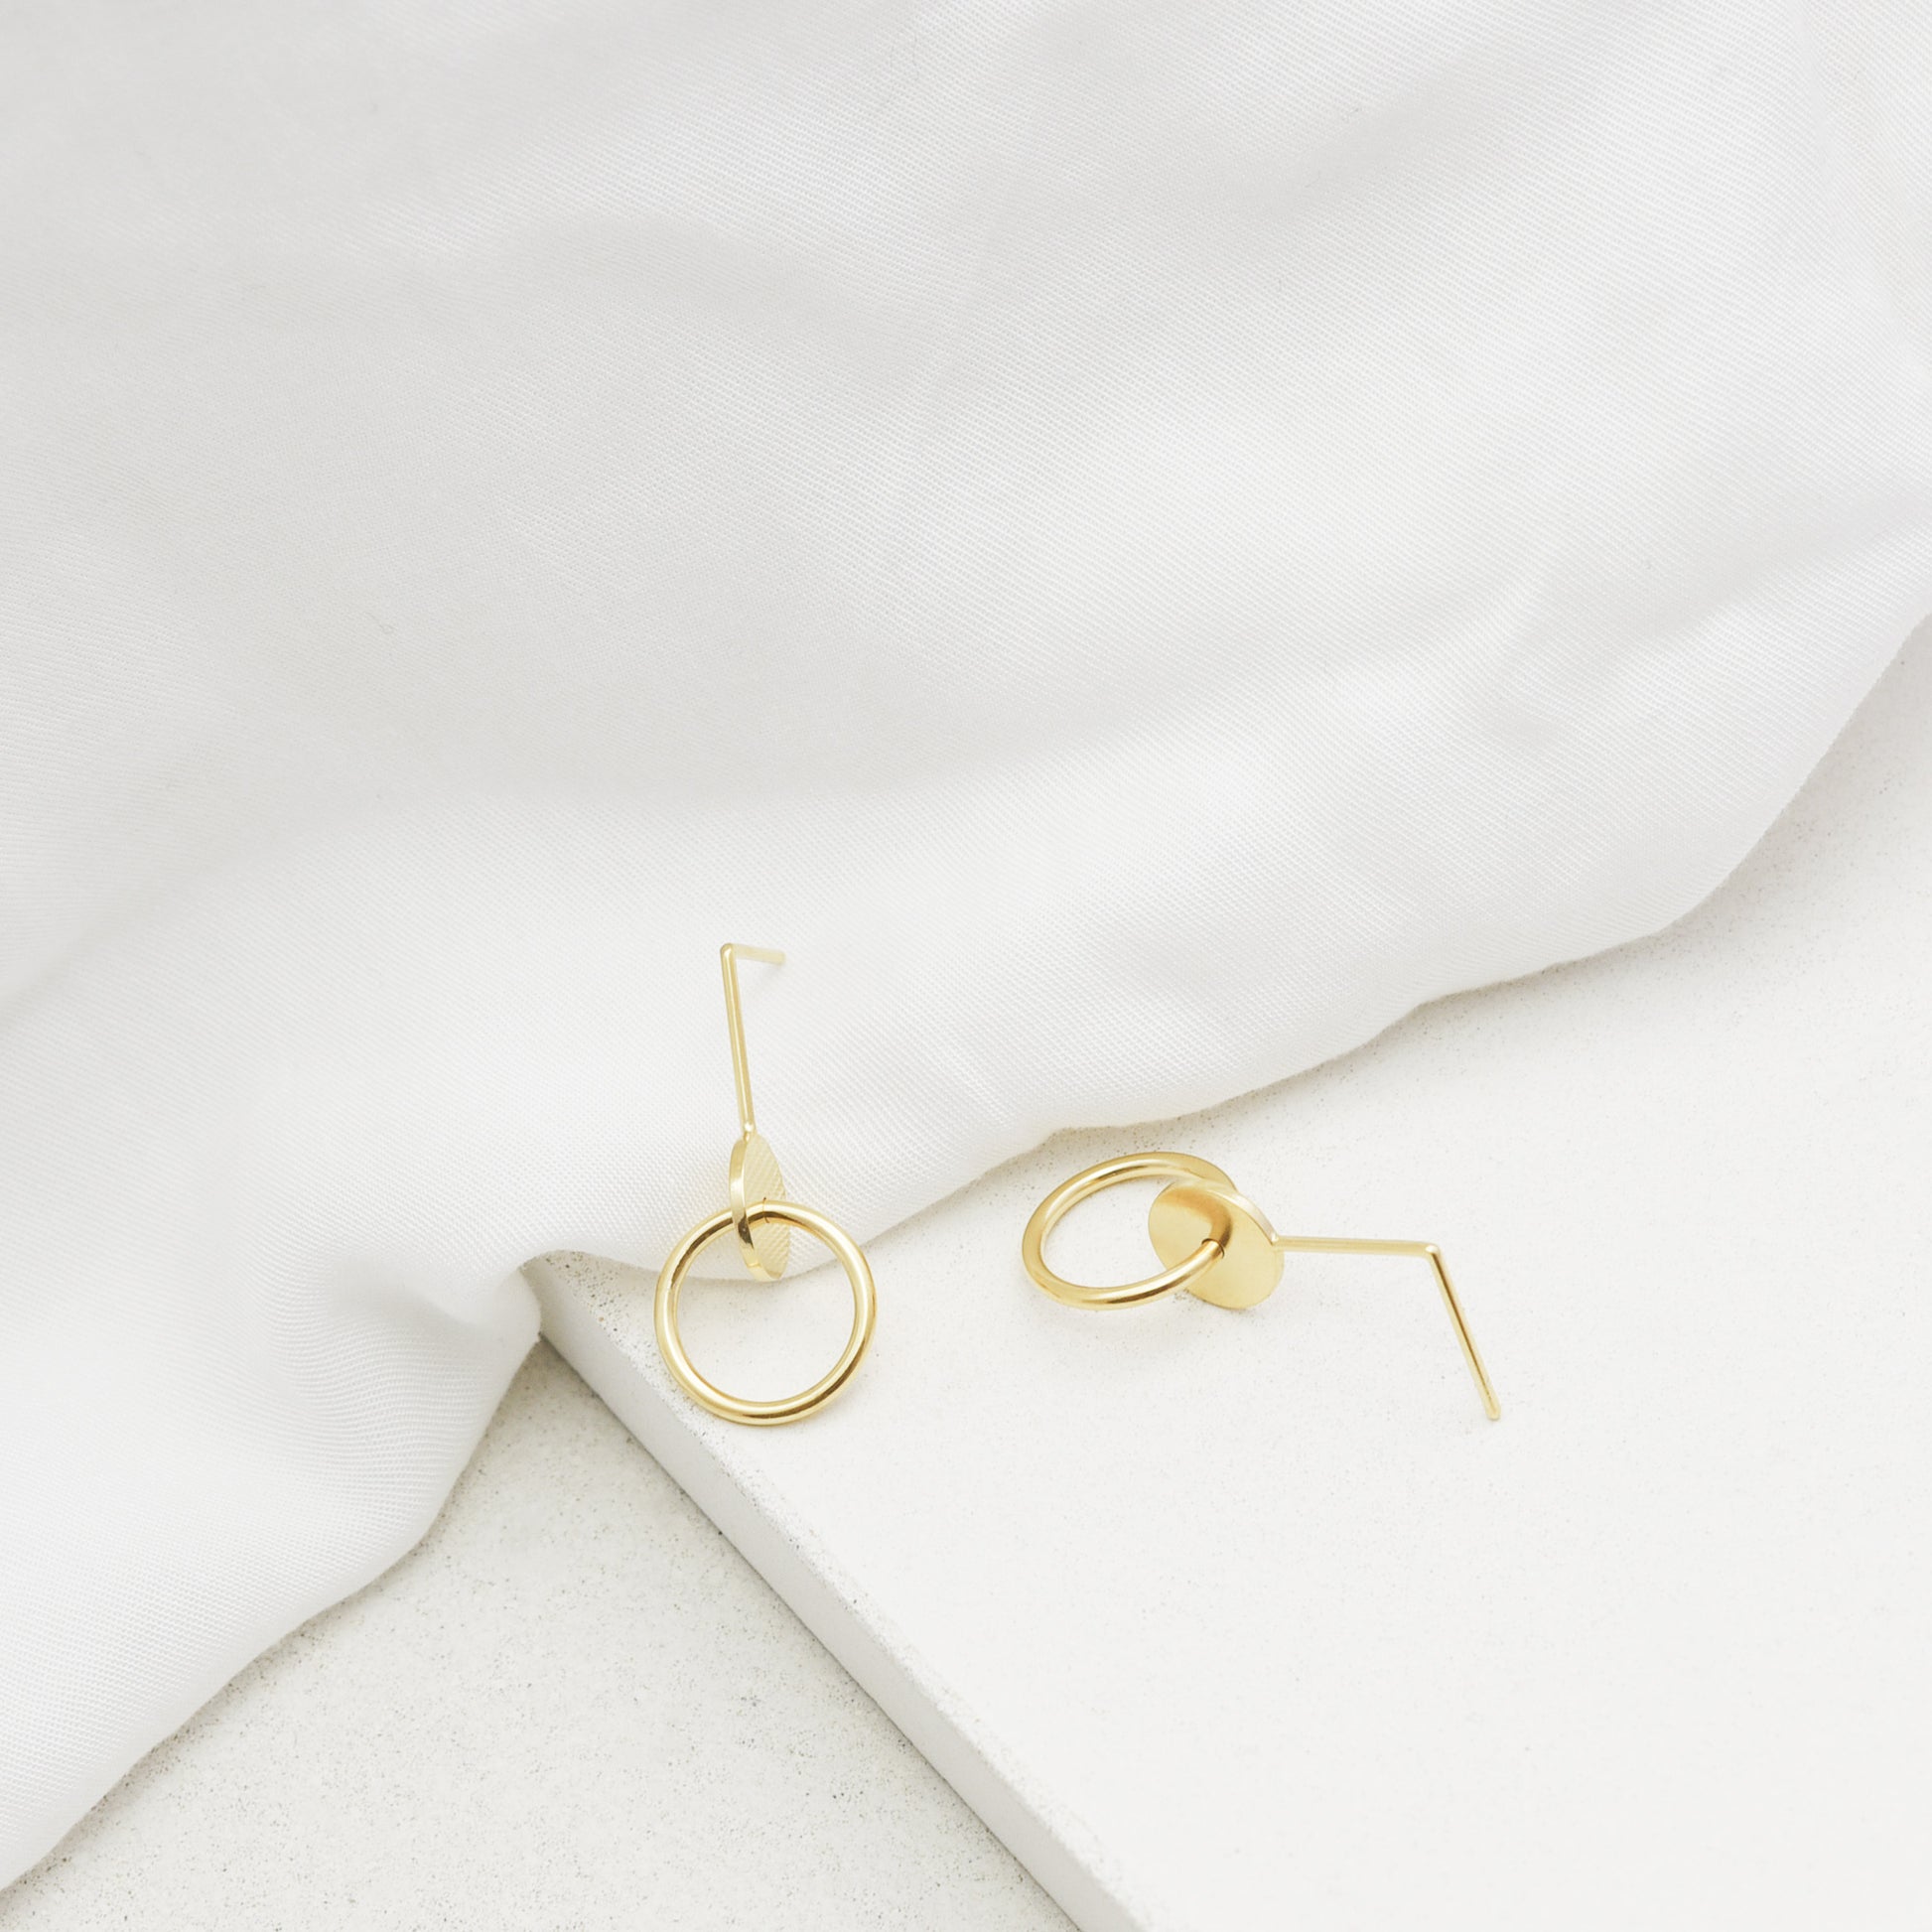  elegant and whimsical at the same time earrings by AgJc